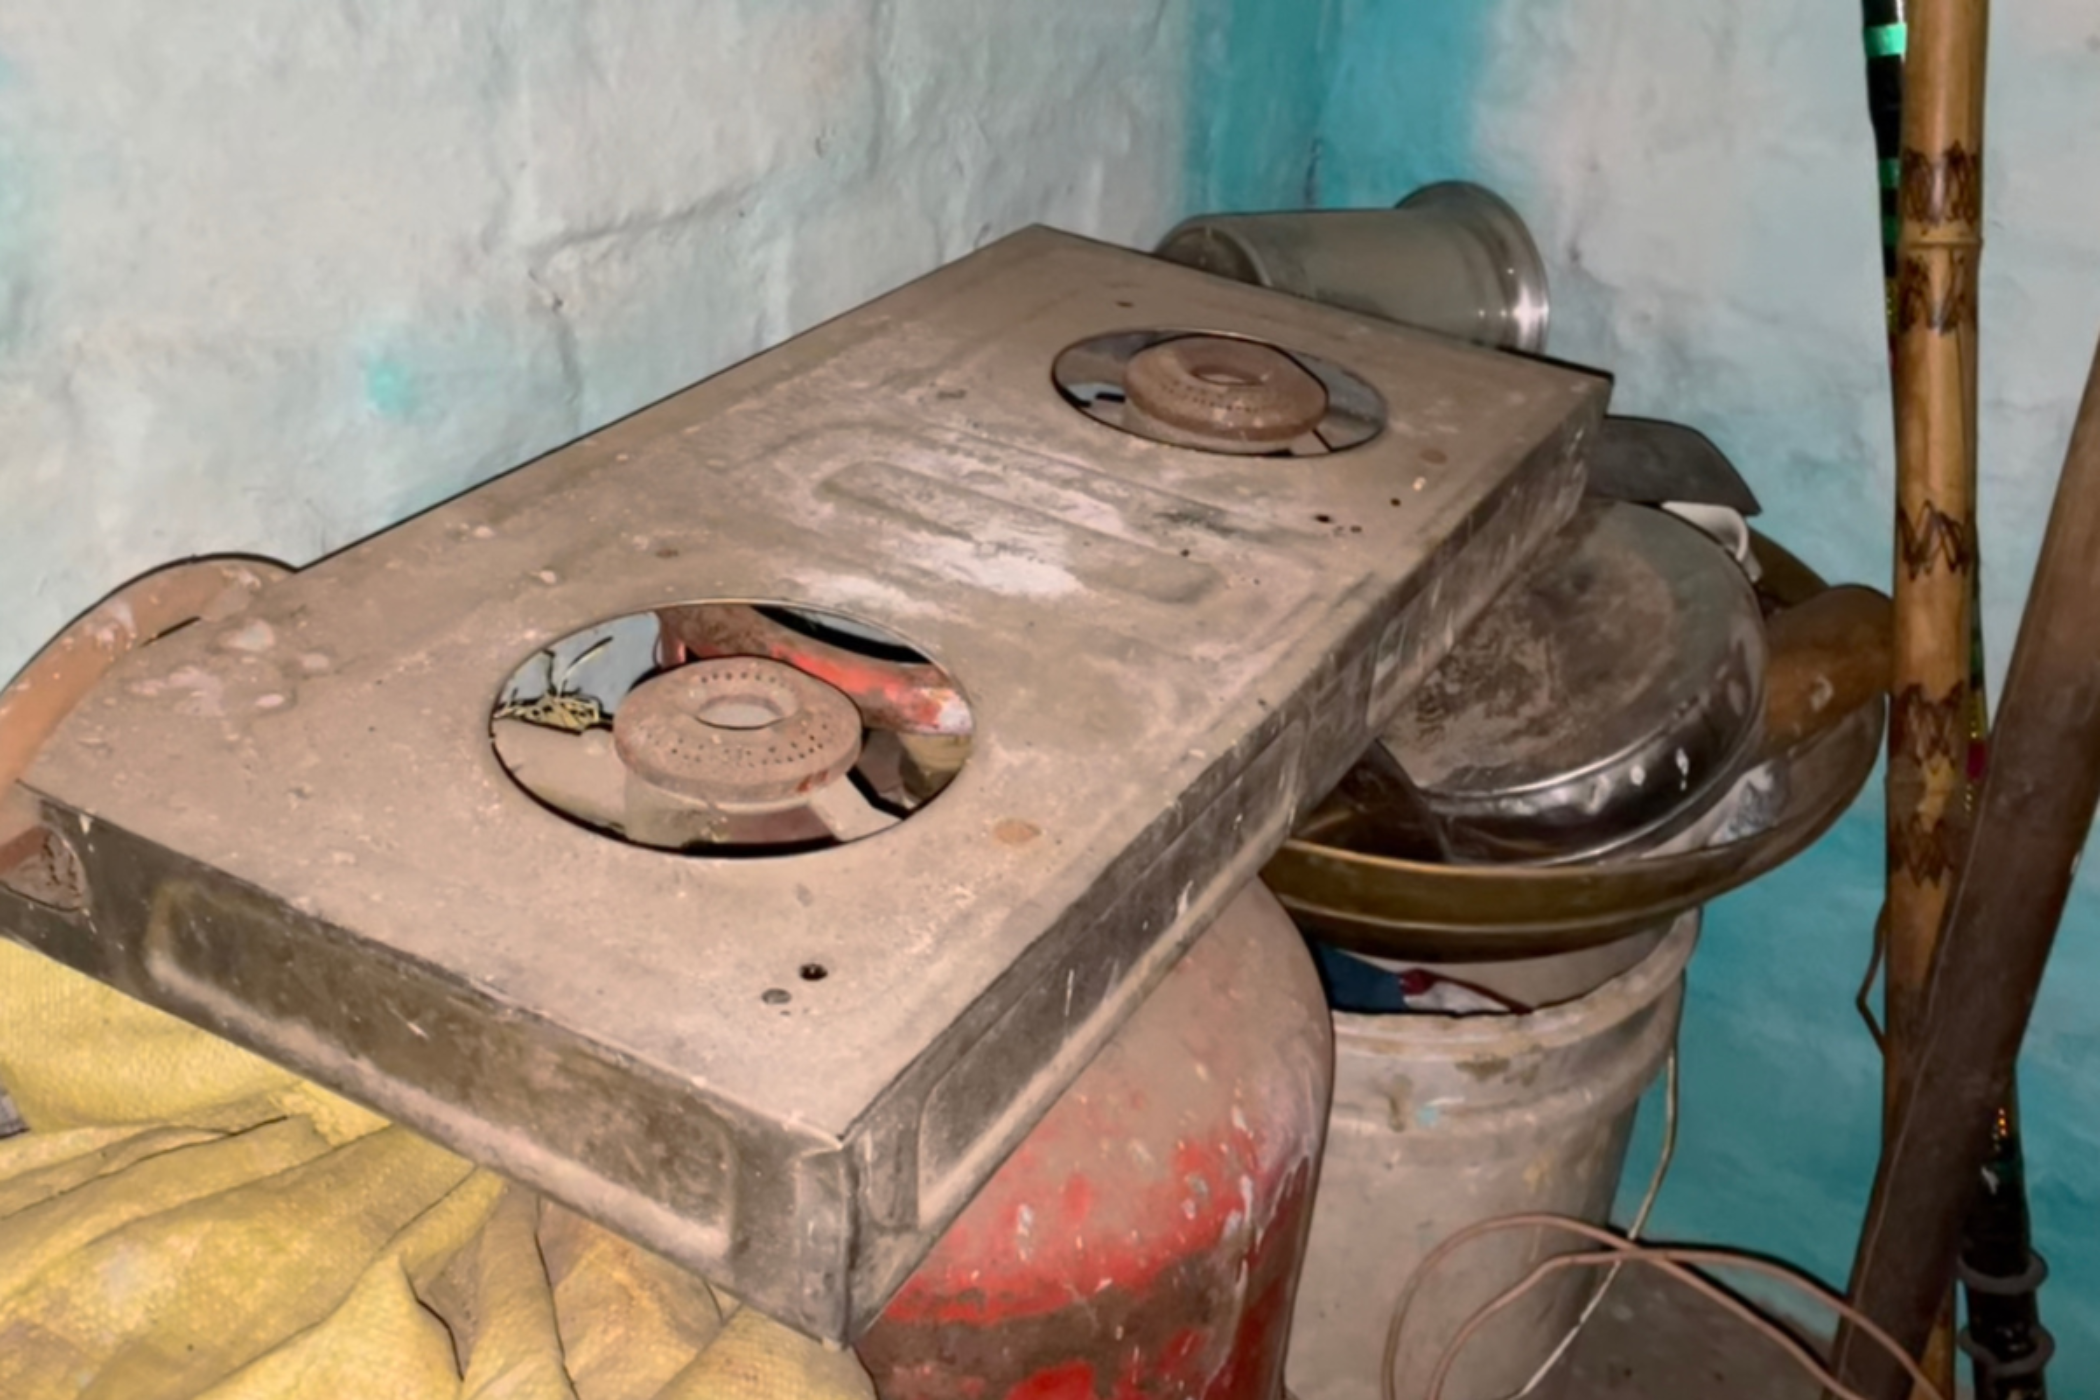 A dusty gas-stove lies on top of a red gas cylinder, a dusty bucket and some overturned vessels.